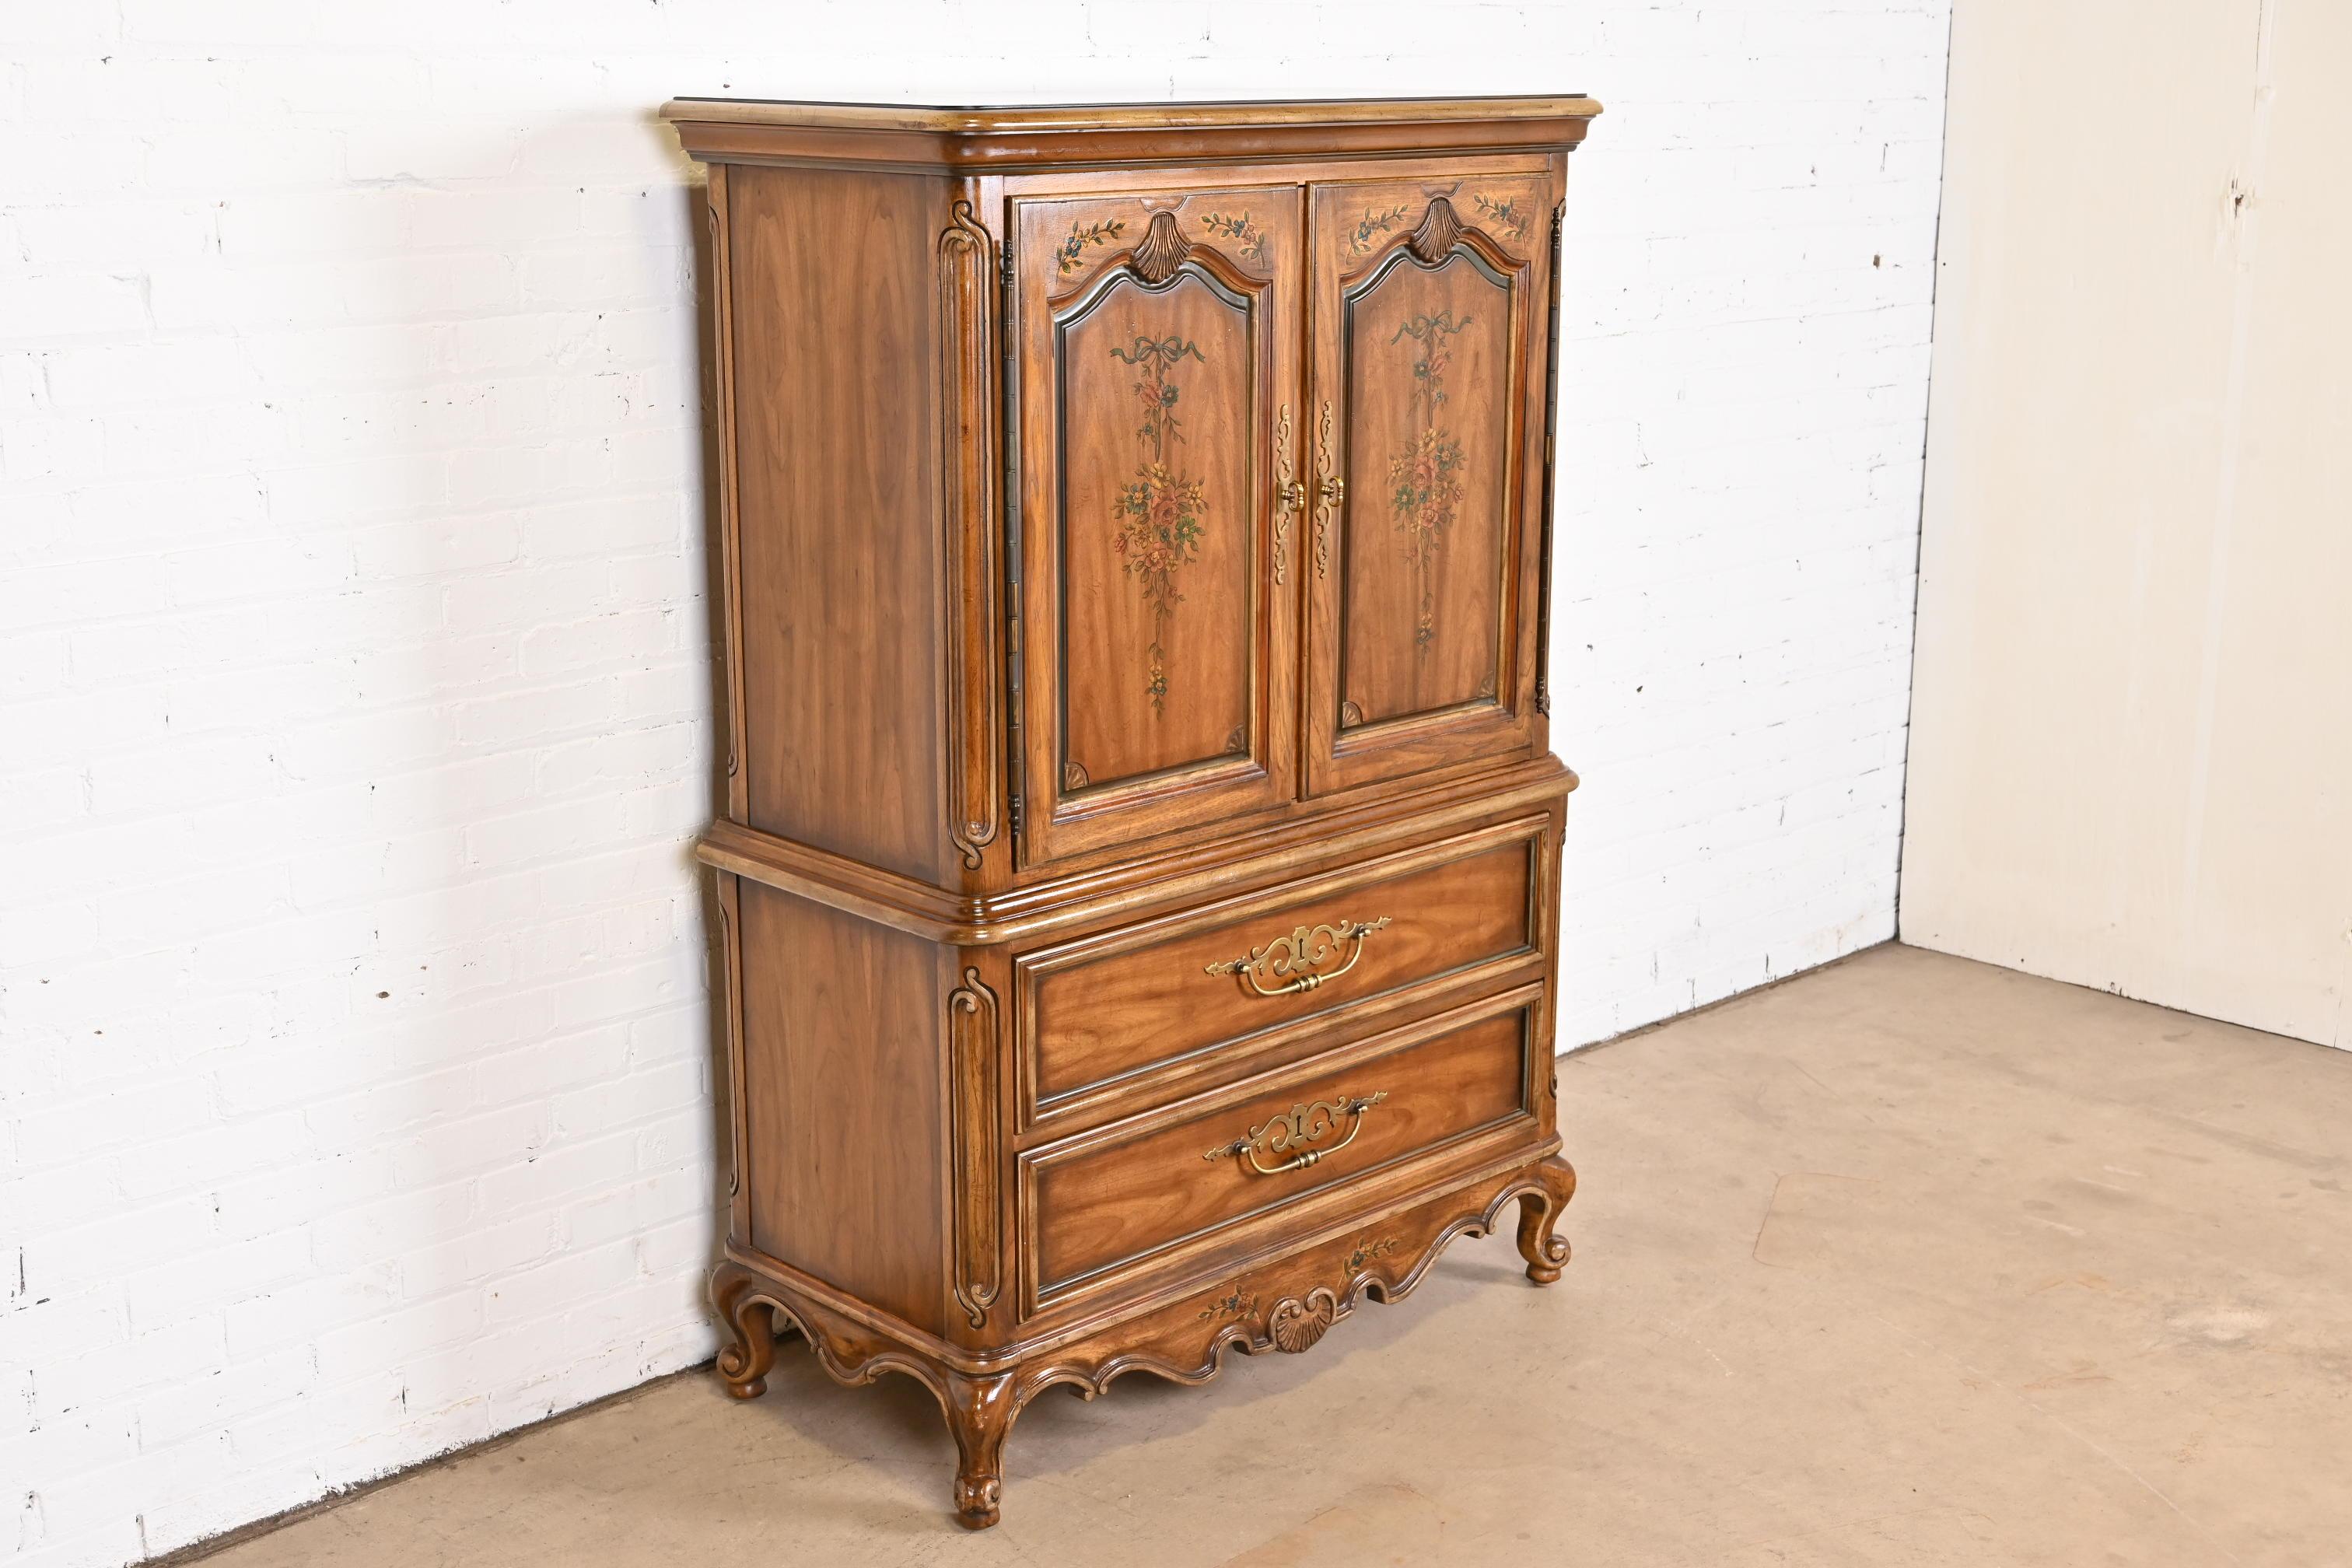 A gorgeous French Provincial Louis XV style gentleman's chest or highboy dresser

By Drexel Heritage, 